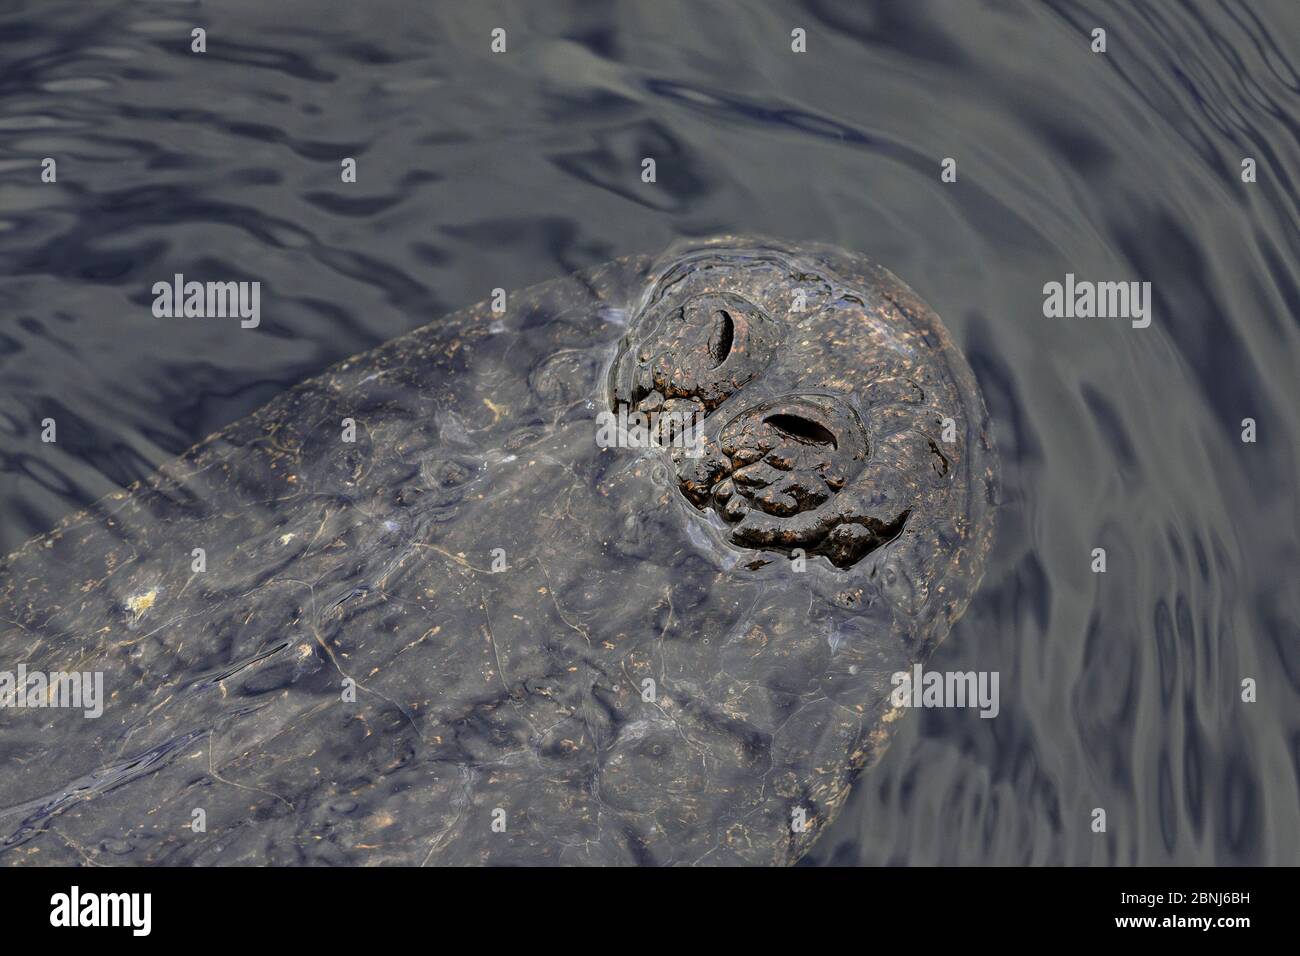 American alligator (Alligator mississippiensis) detail of snout, Everglades, USA, January. Stock Photo